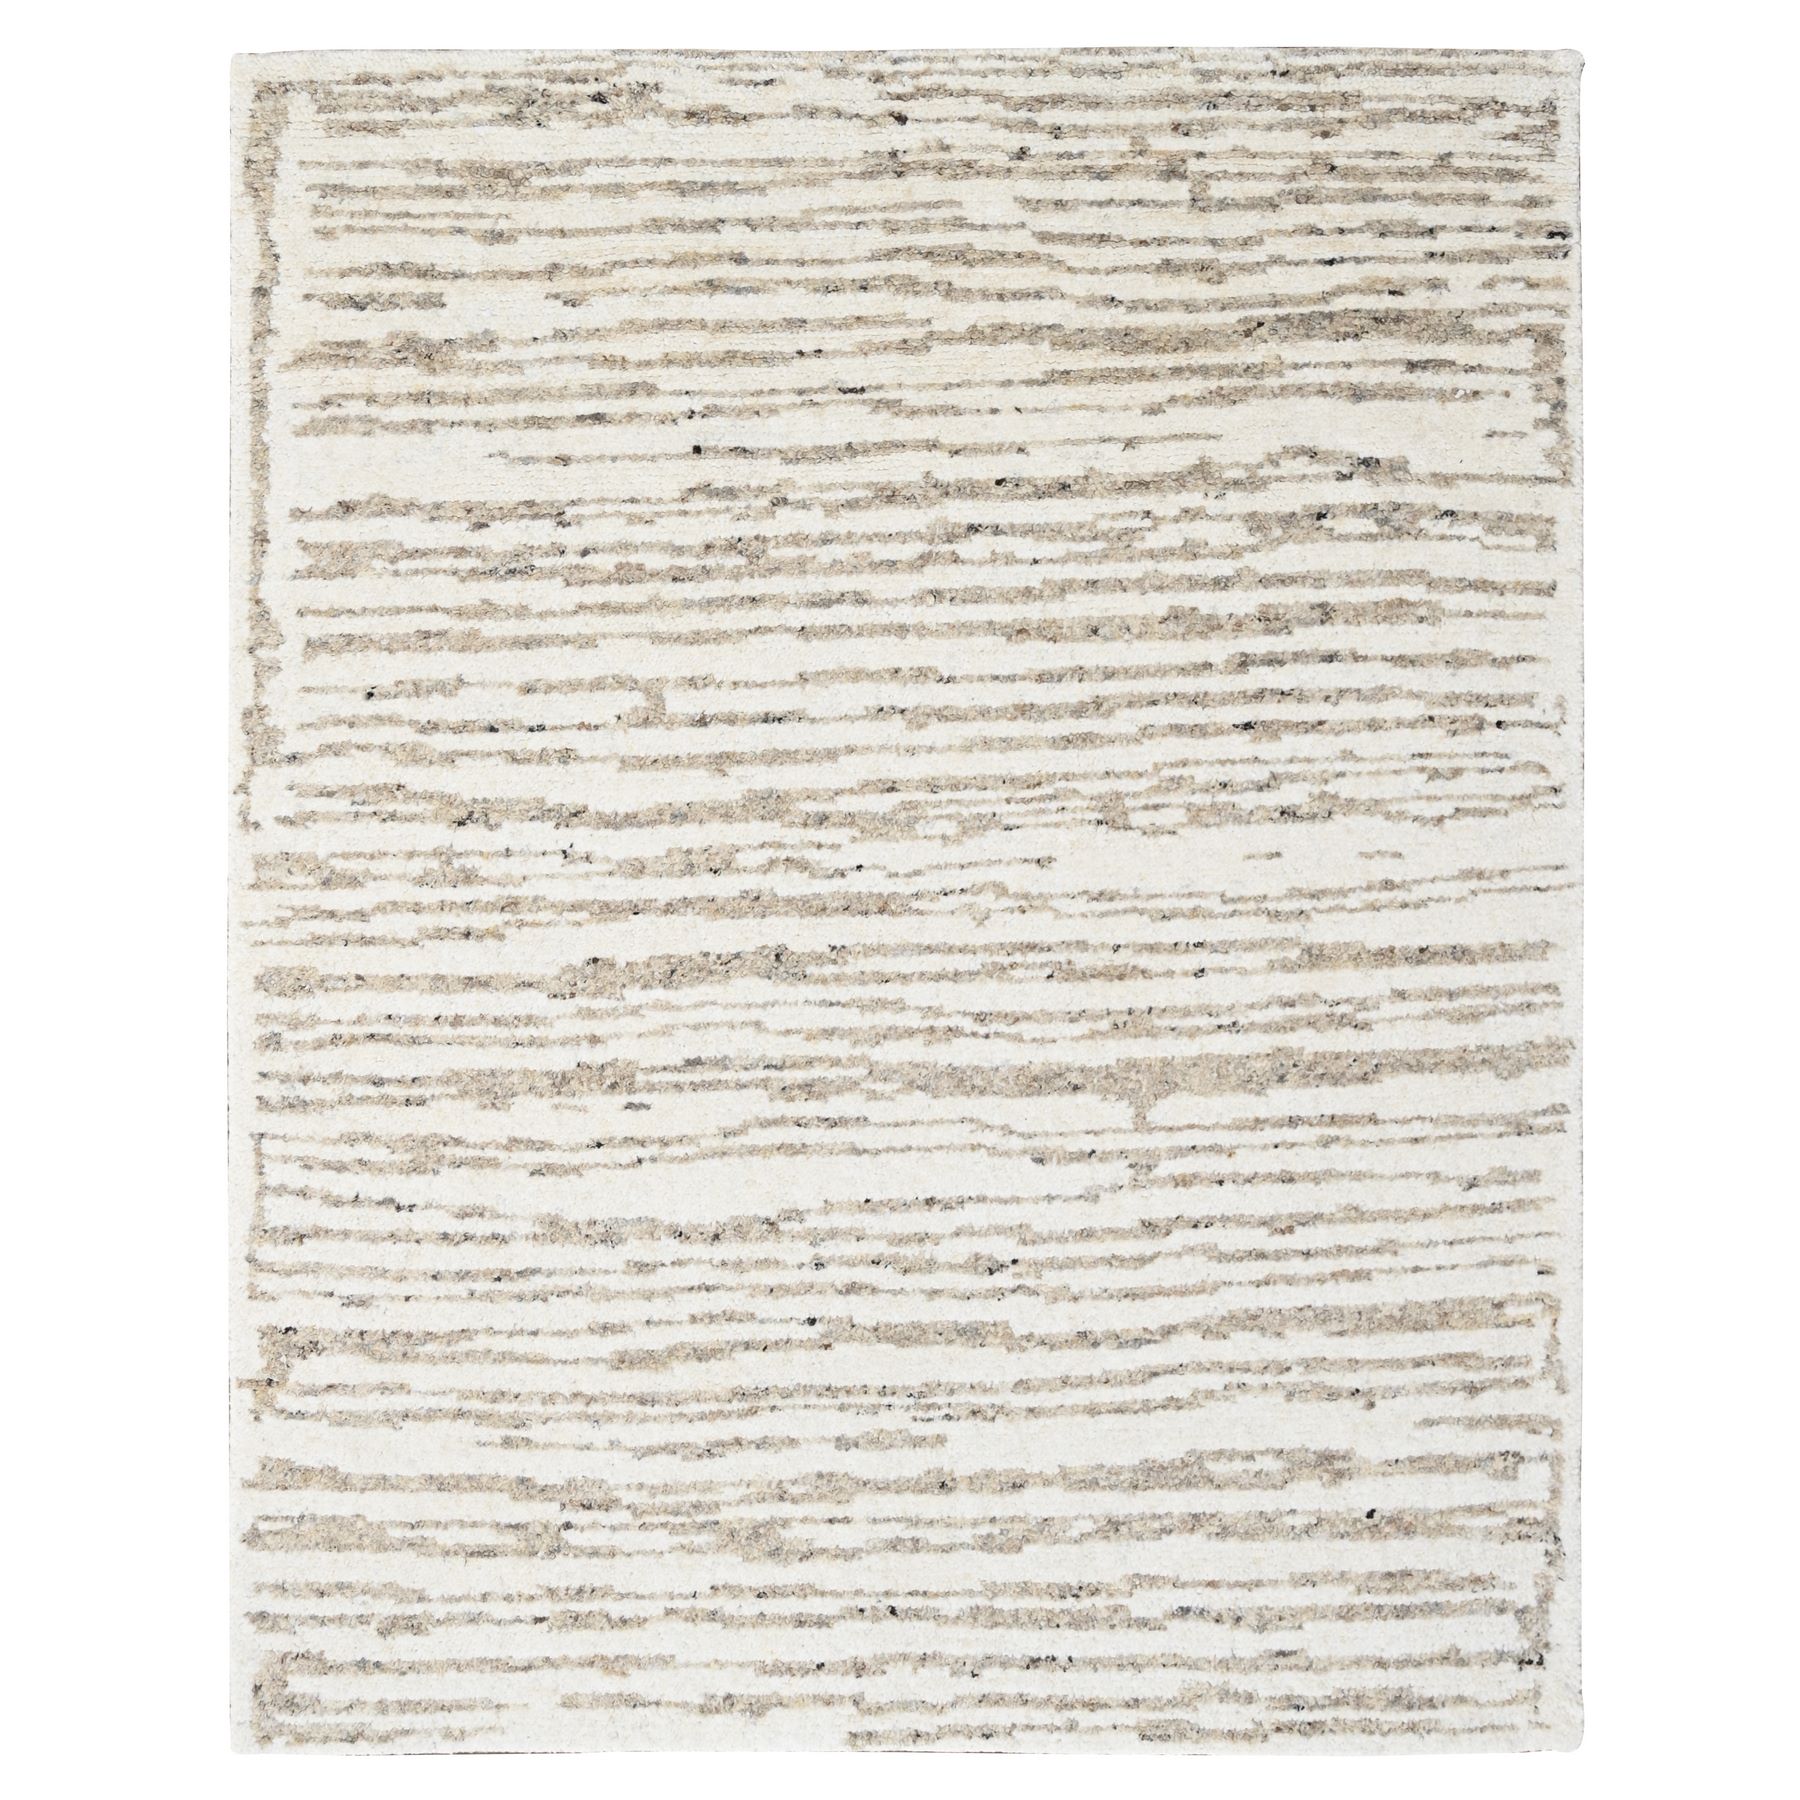  Wool Hand-Knotted Area Rug 8'2